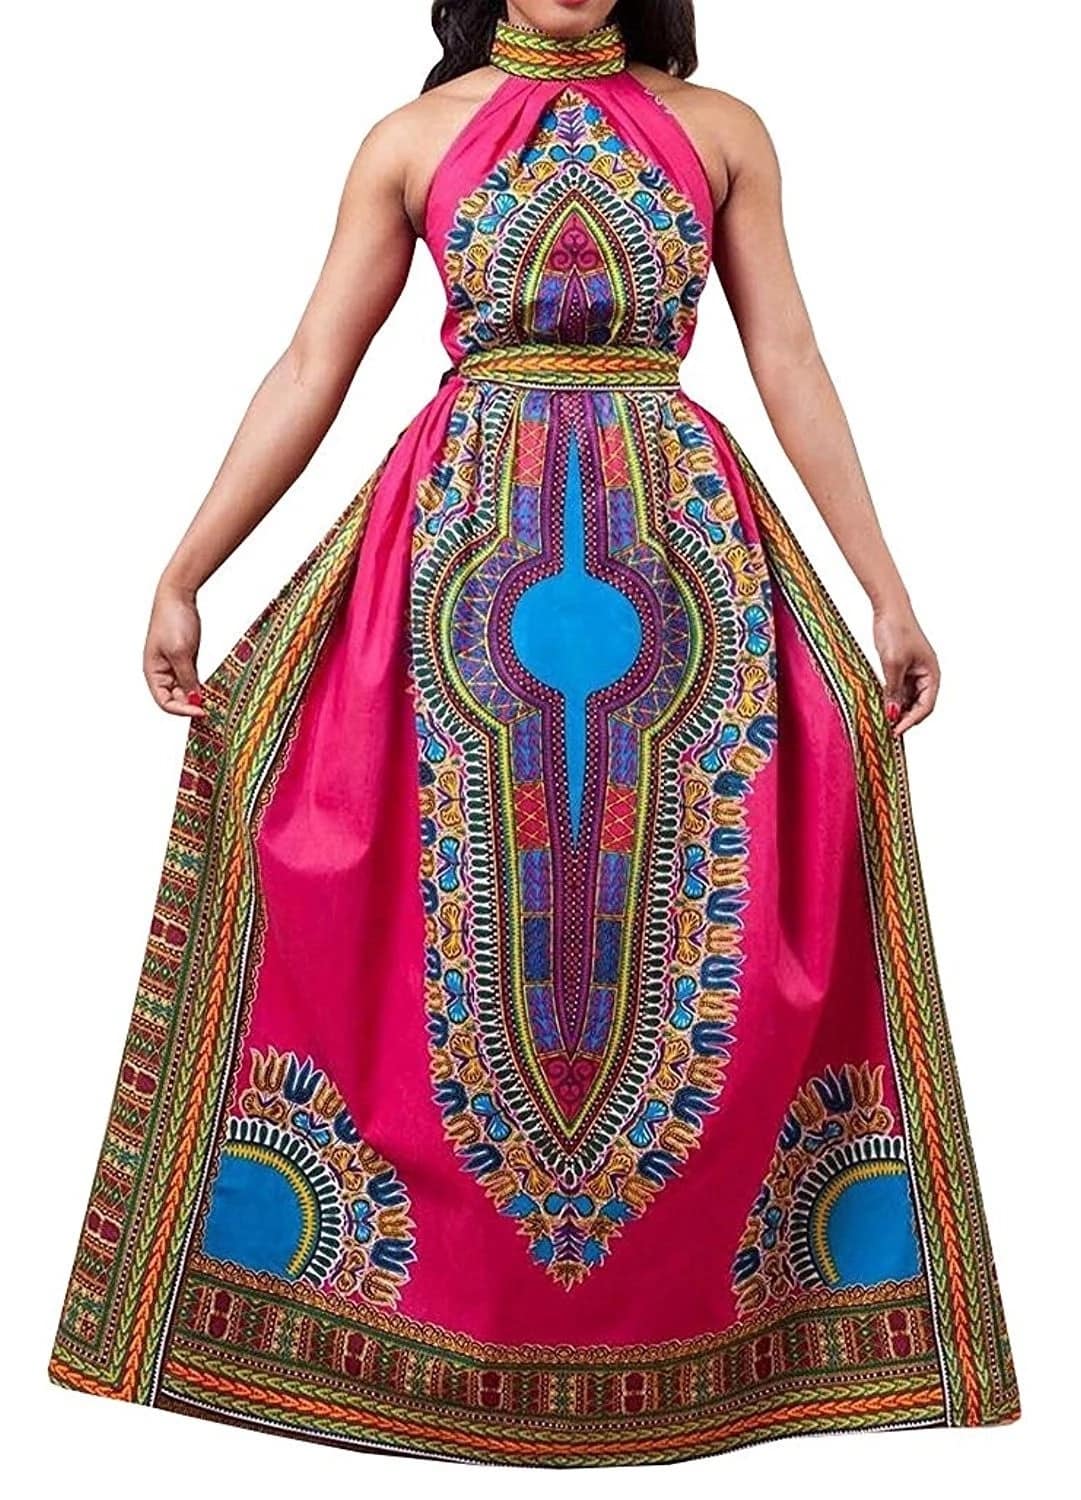 african print dress styles
african wear for women
simple african print dresses
african dress designs for ladies
ankara dresses for plus size